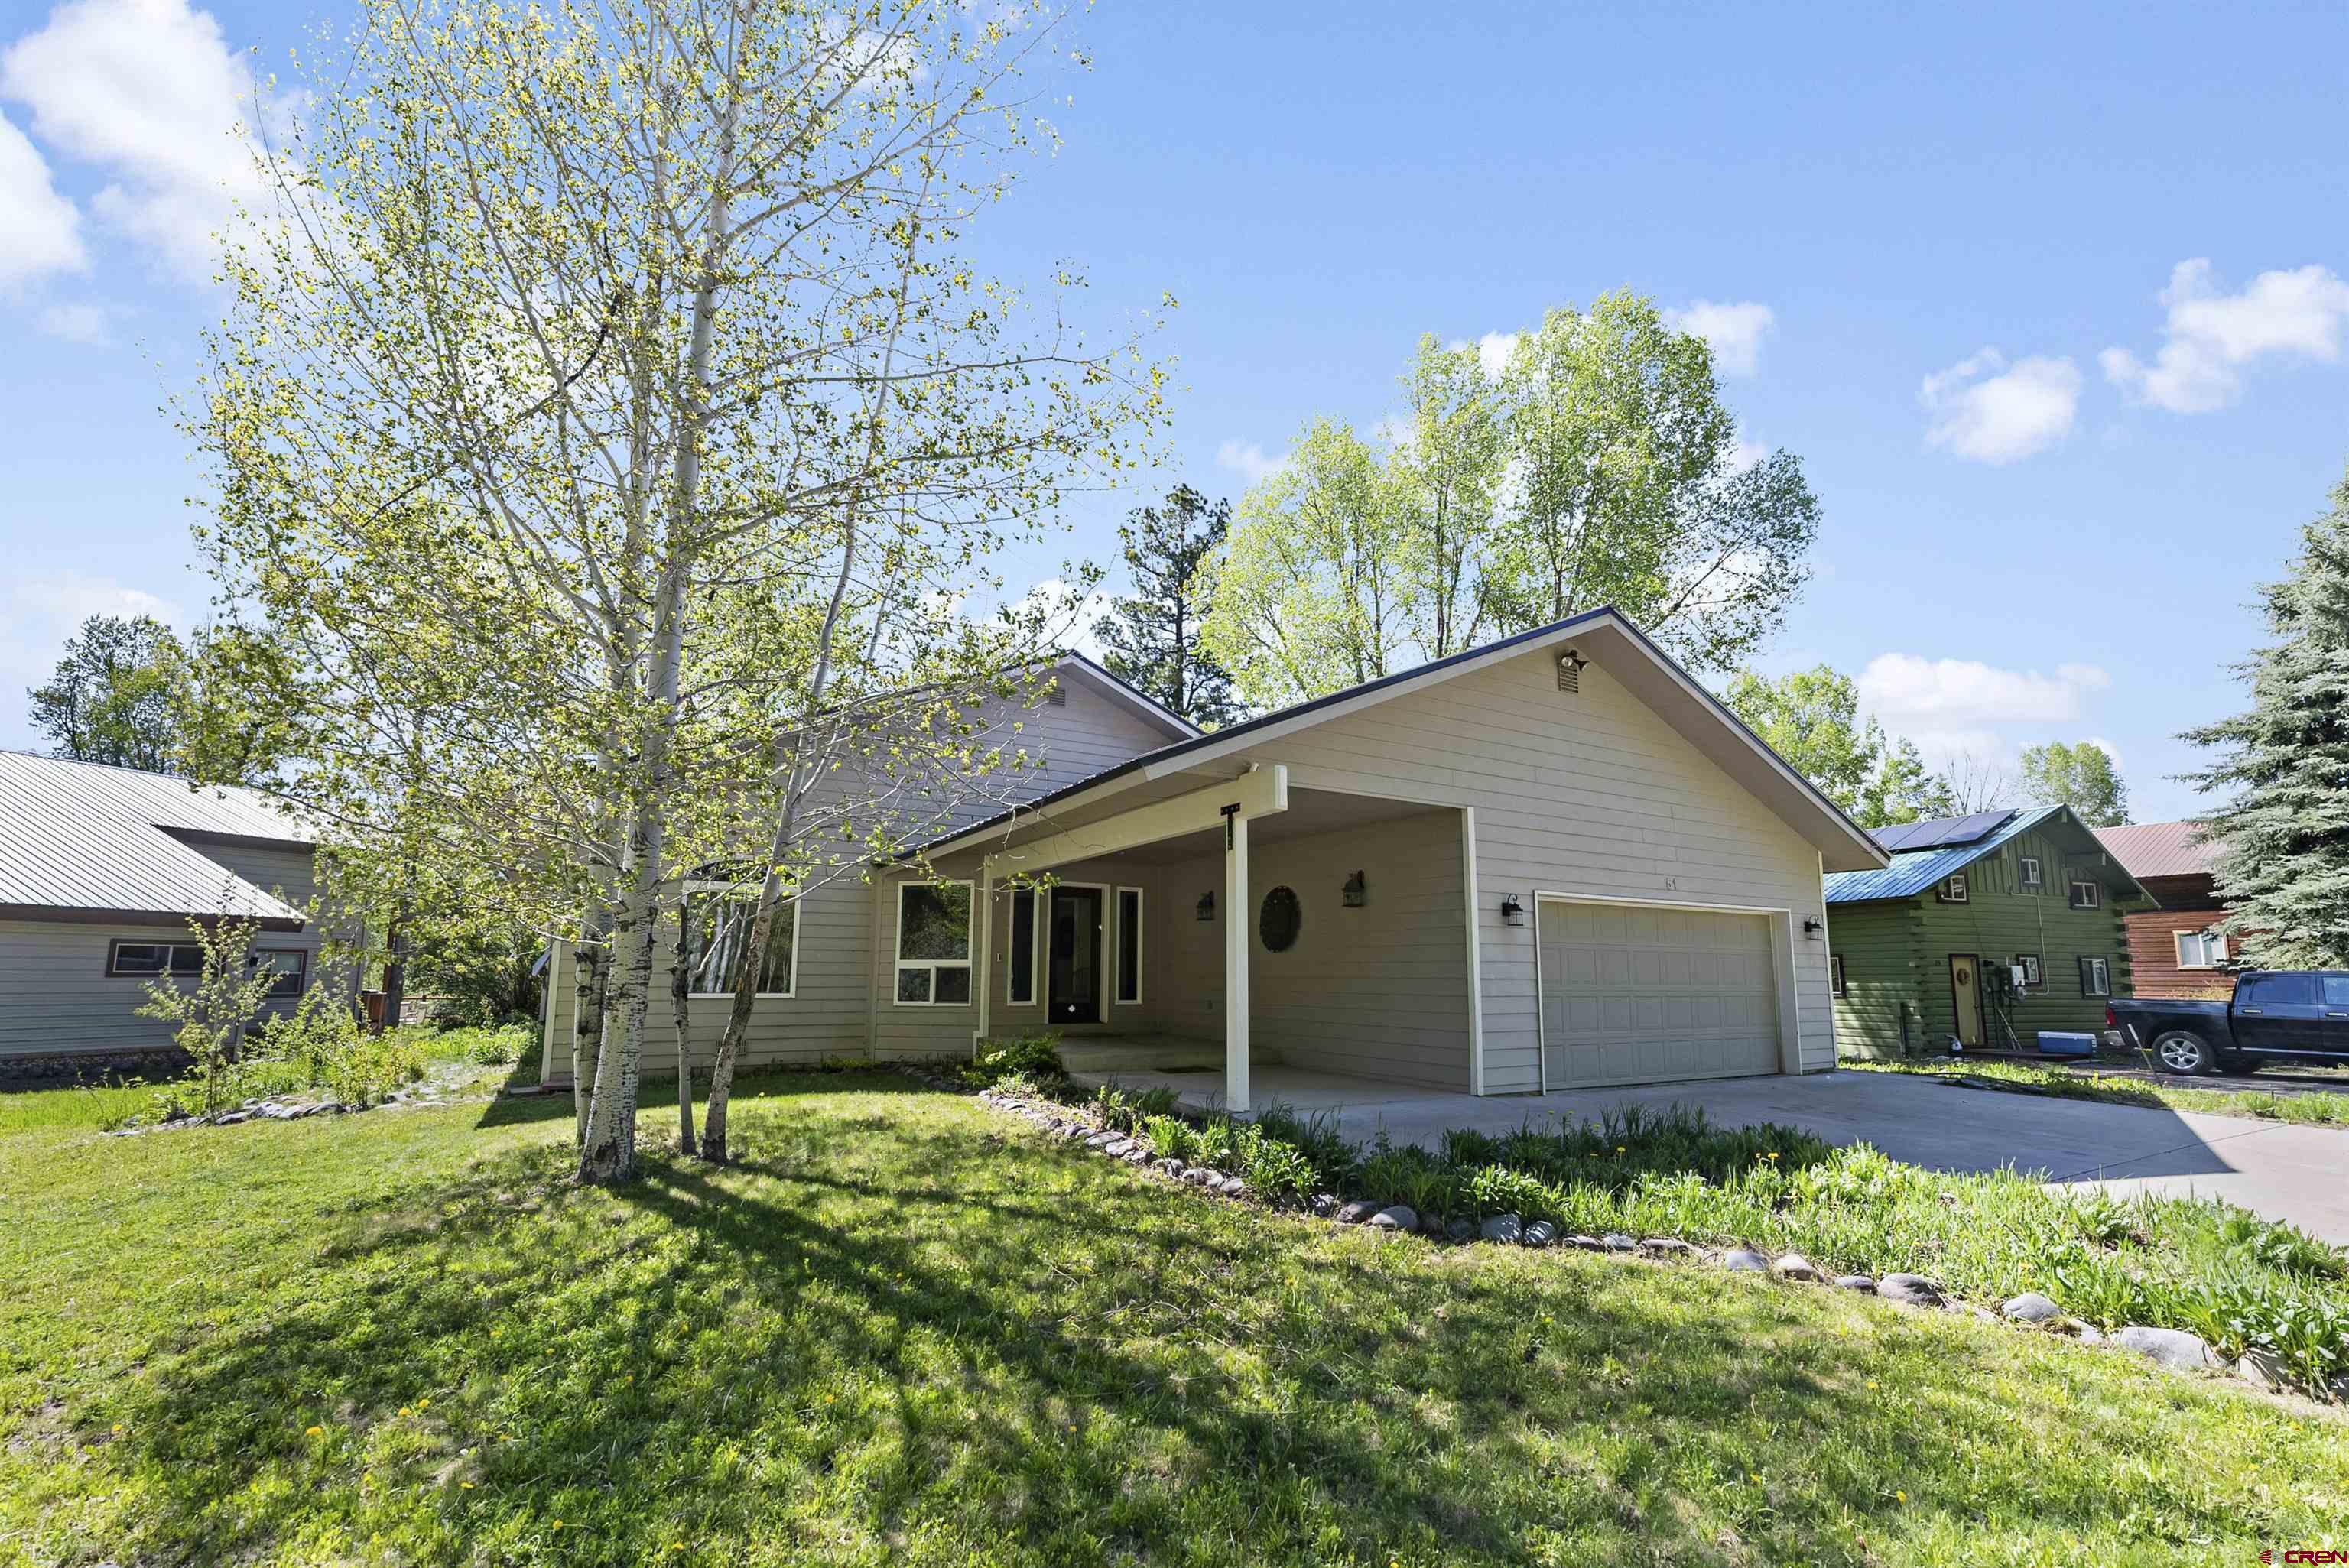 51 Little Beaver Place, Pagosa Springs, CO 81147 Listing Photo  4